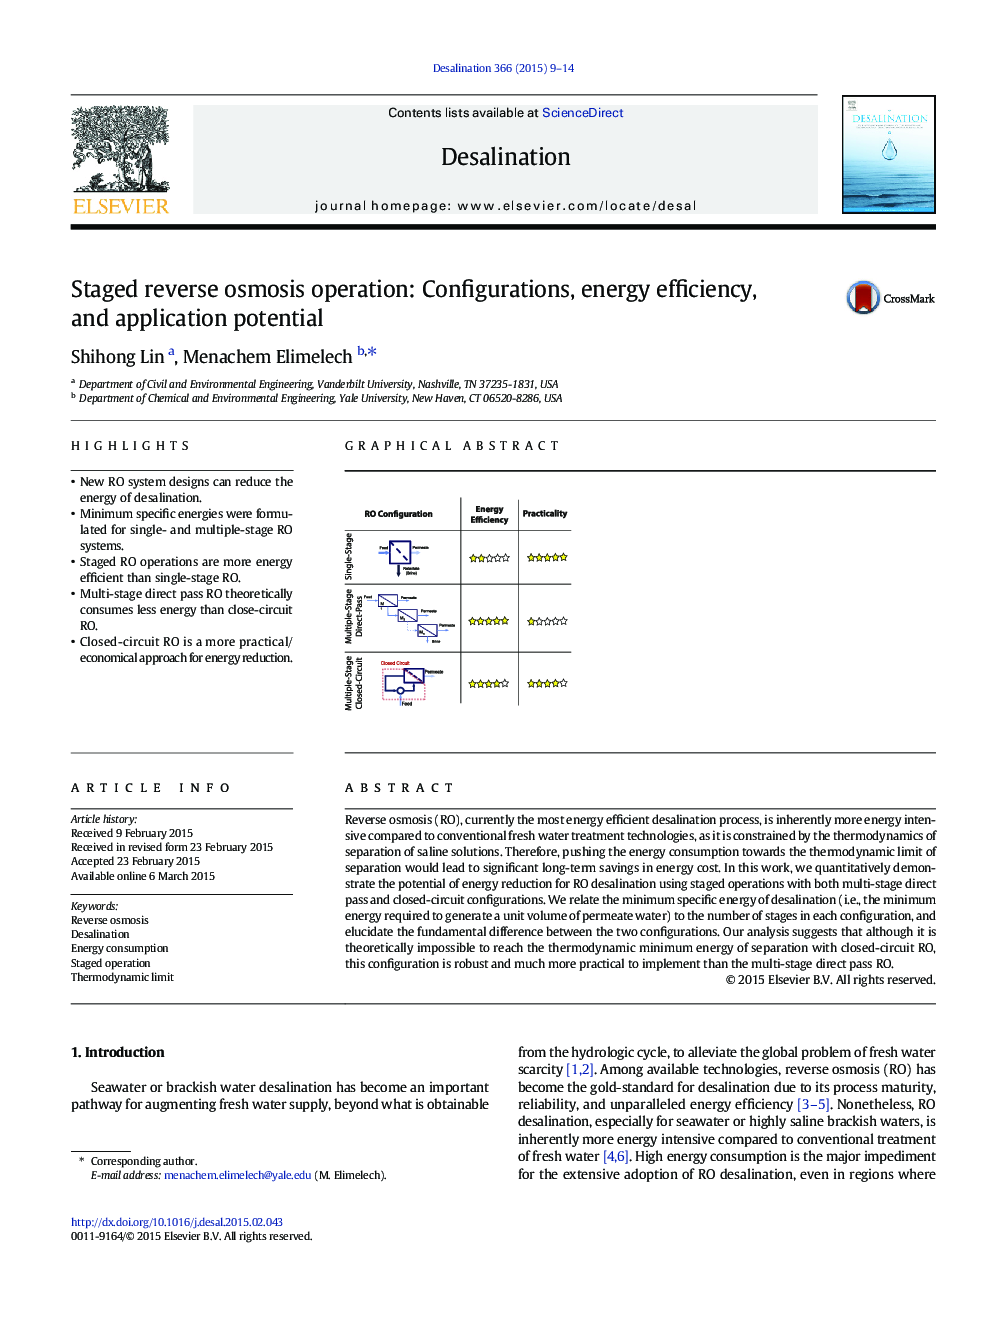 Staged reverse osmosis operation: Configurations, energy efficiency, and application potential